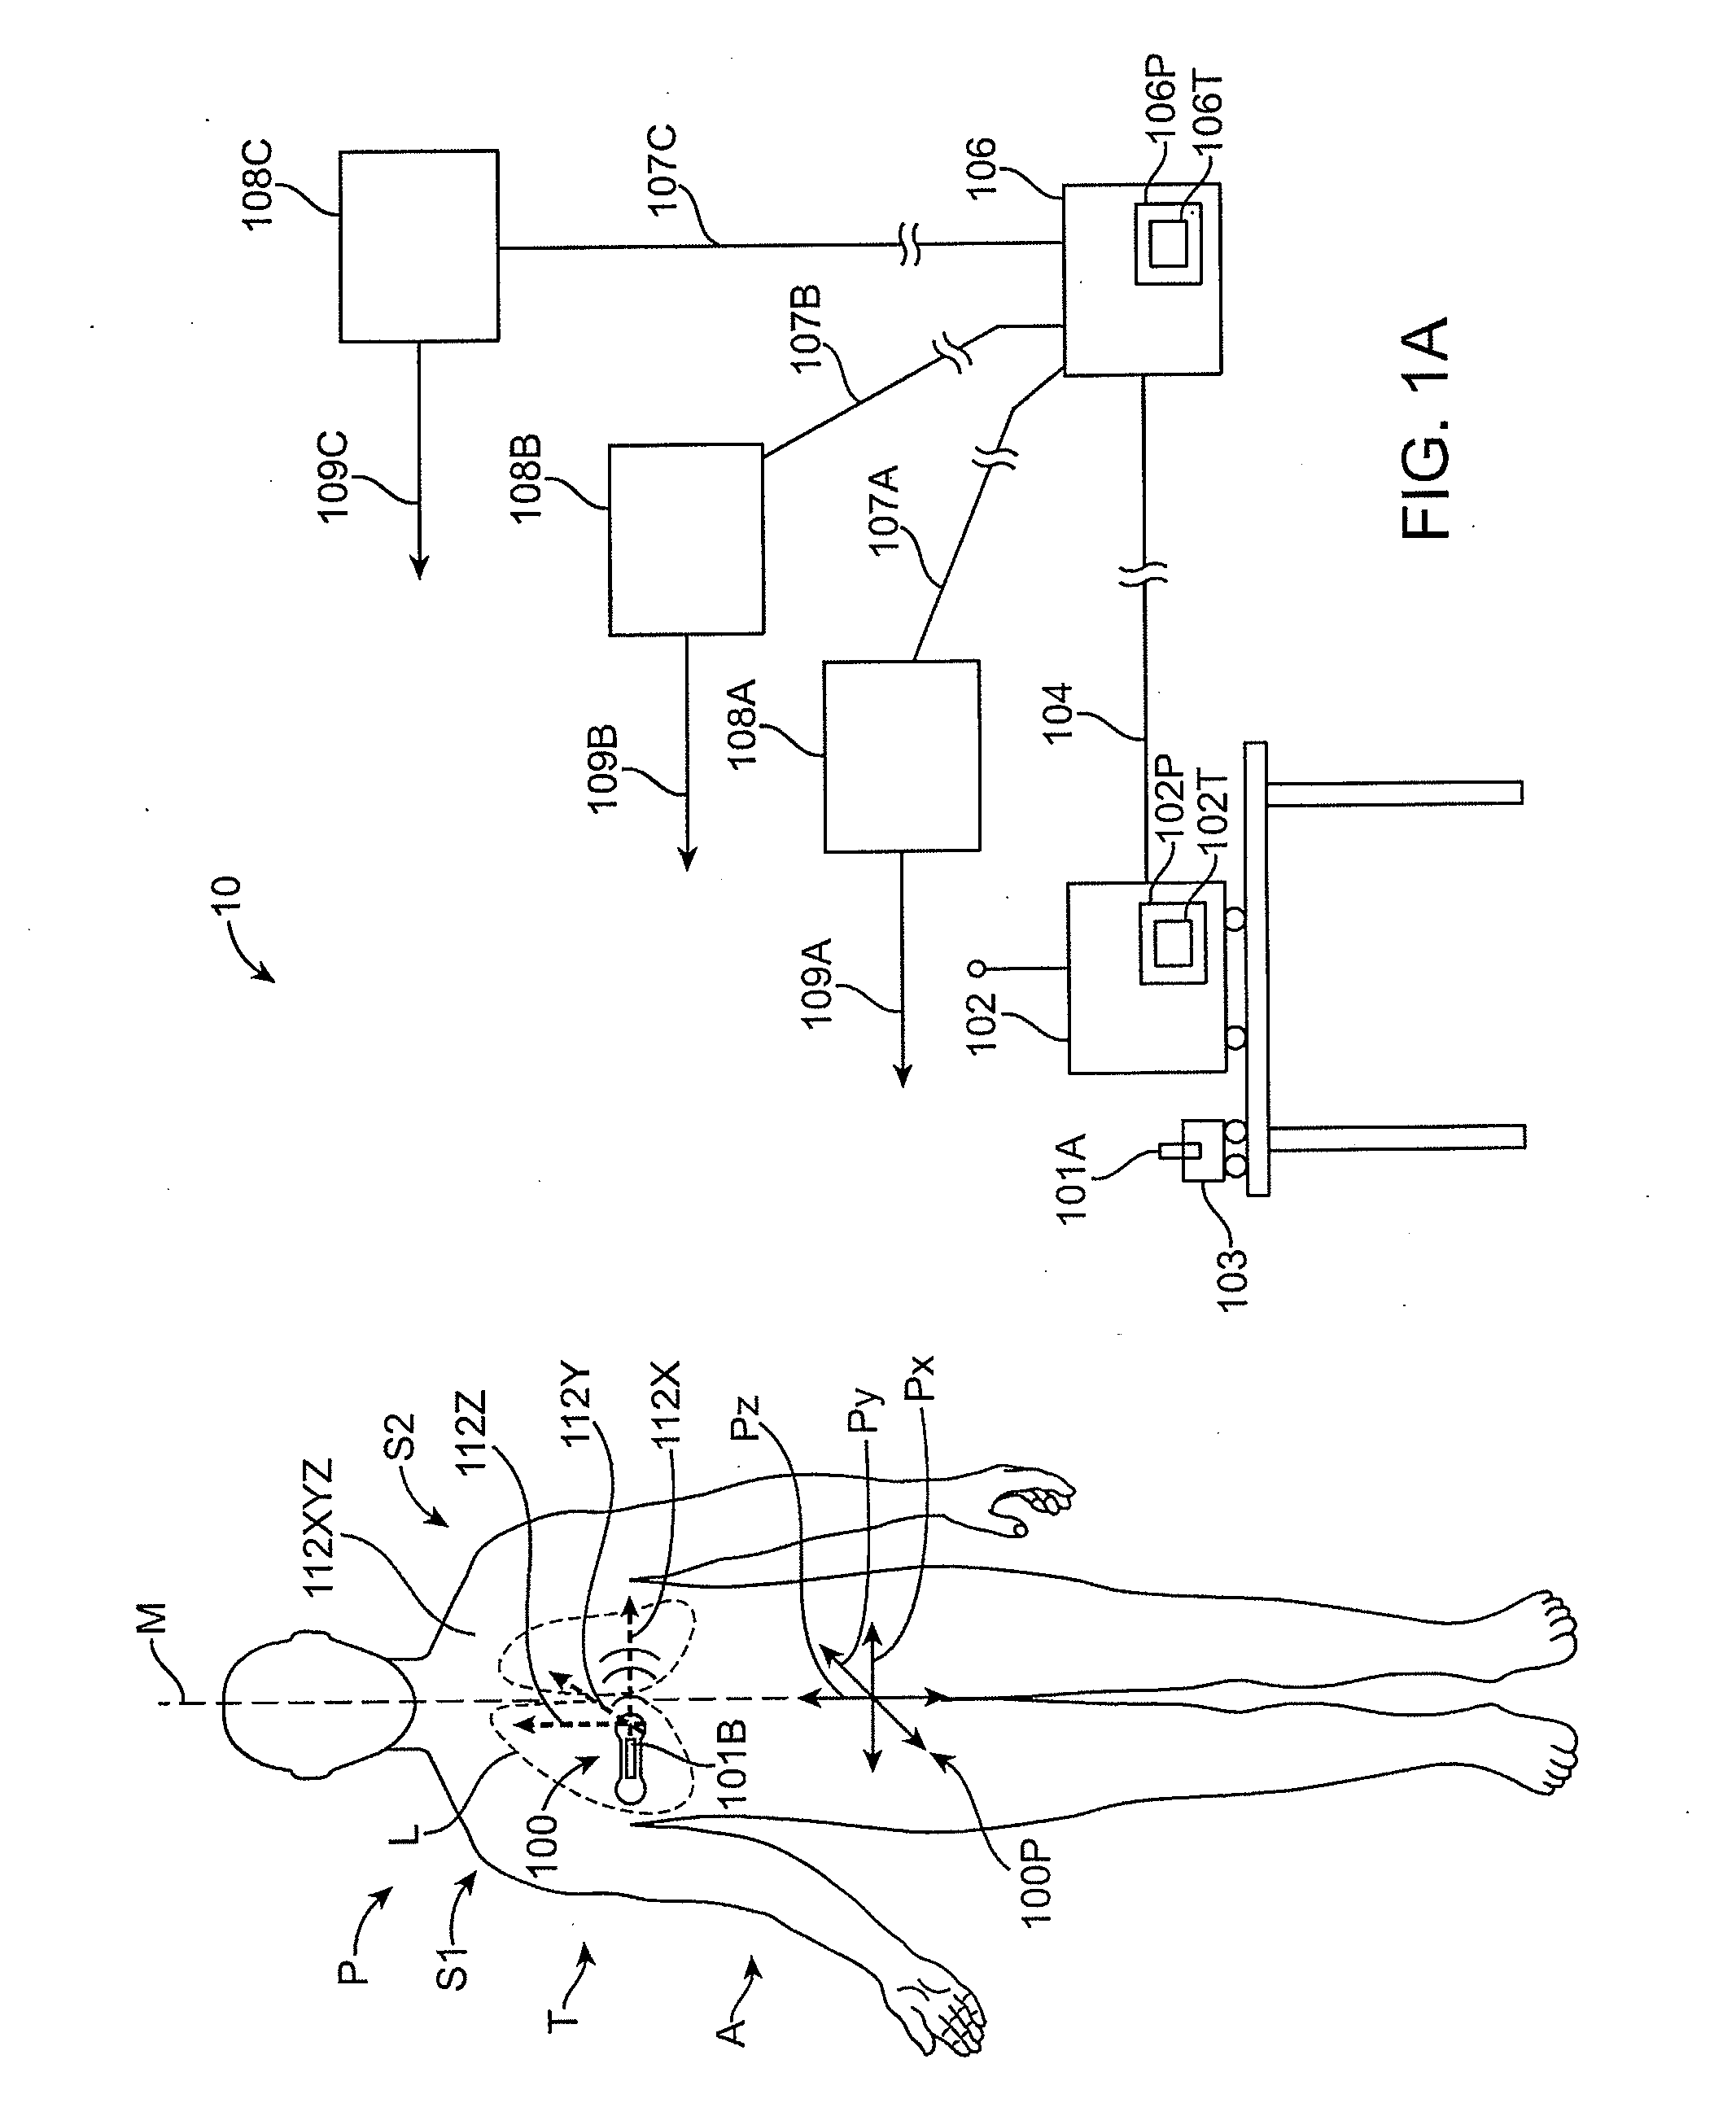 Method and Apparatus for Monitoring Fluid Content within Body Tissues